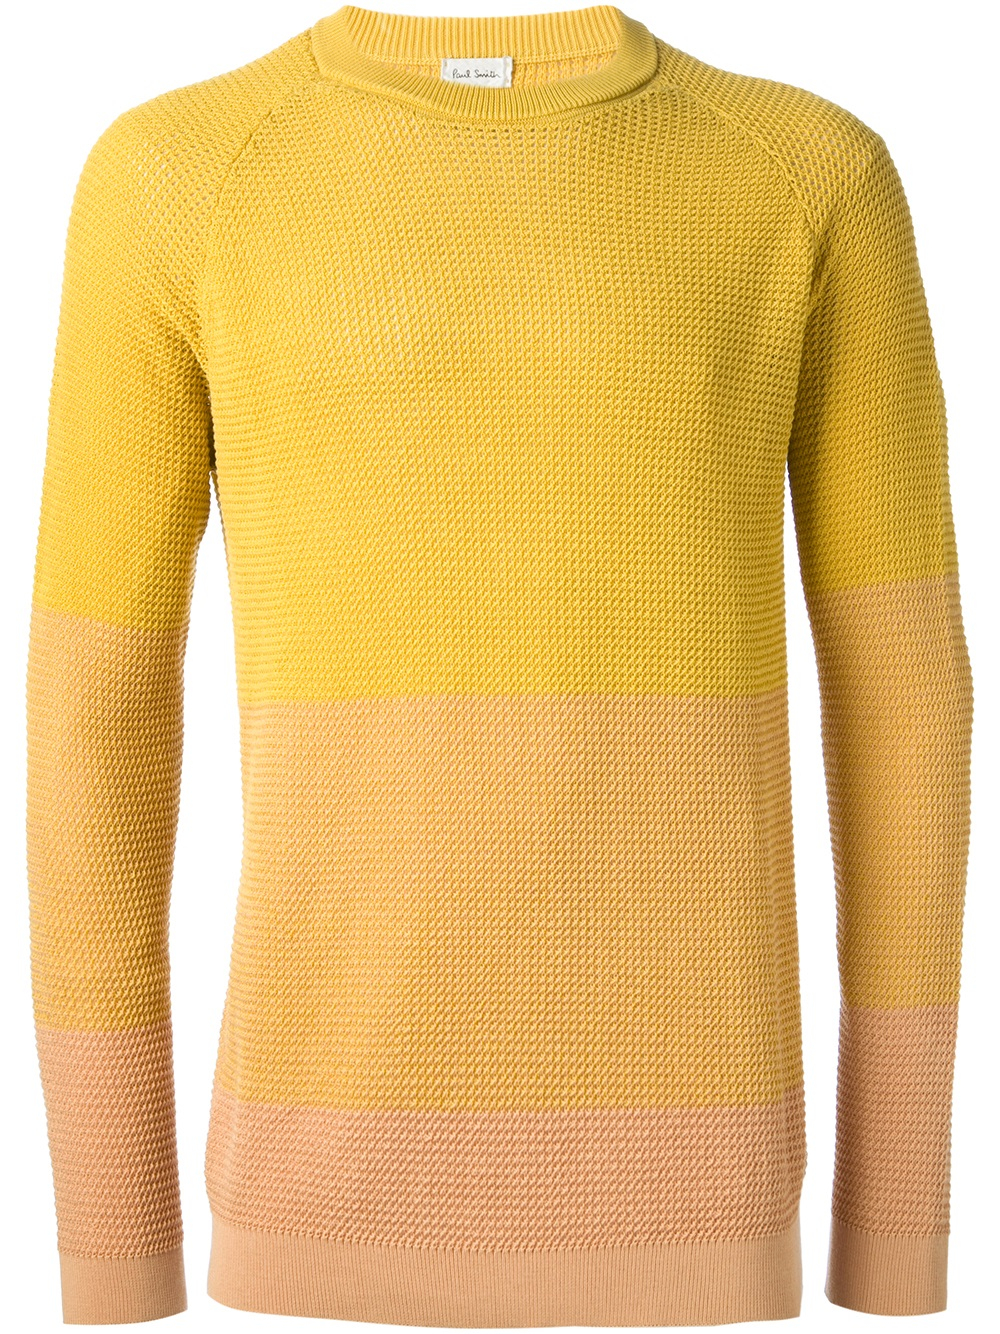 Lyst - Paul smith Knitted Gradient Colour Sweater in Orange for Men